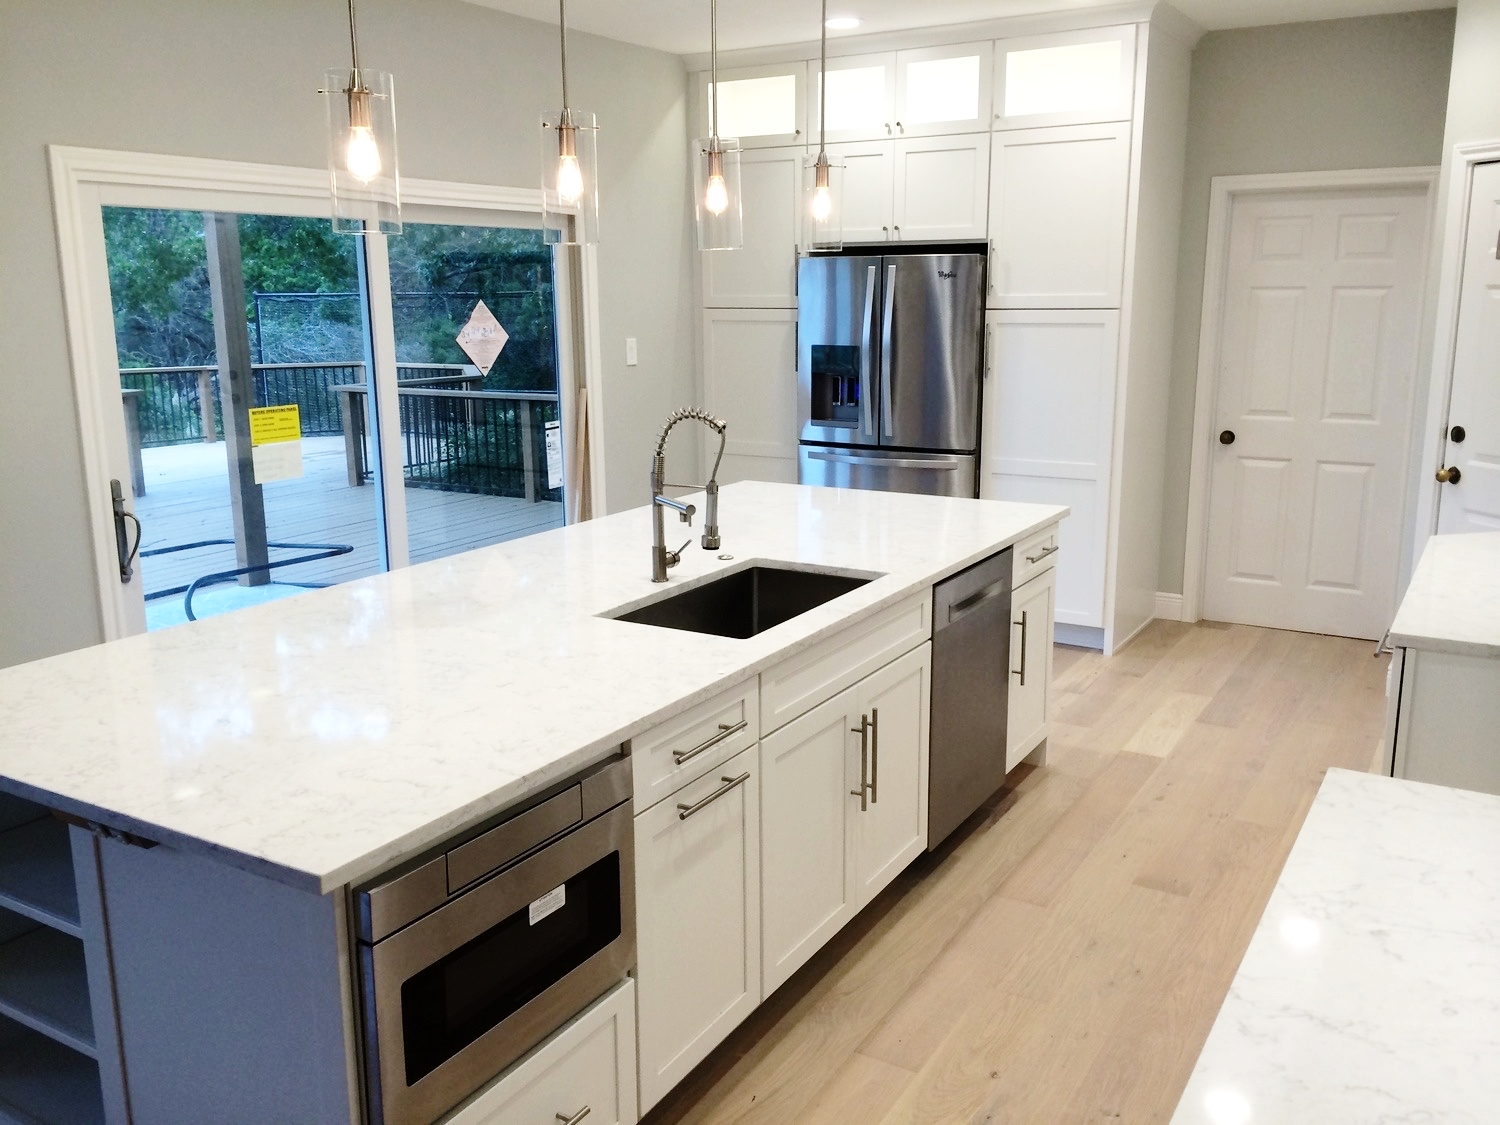  Beautiful new kitchen!&nbsp;Complete with white cabinets from UB Kitchens, quartz countertops, glass backsplash. There is extra storage space with the spacious island and full height cabinets. It is beautifully lit with under cabinet lighting as wel